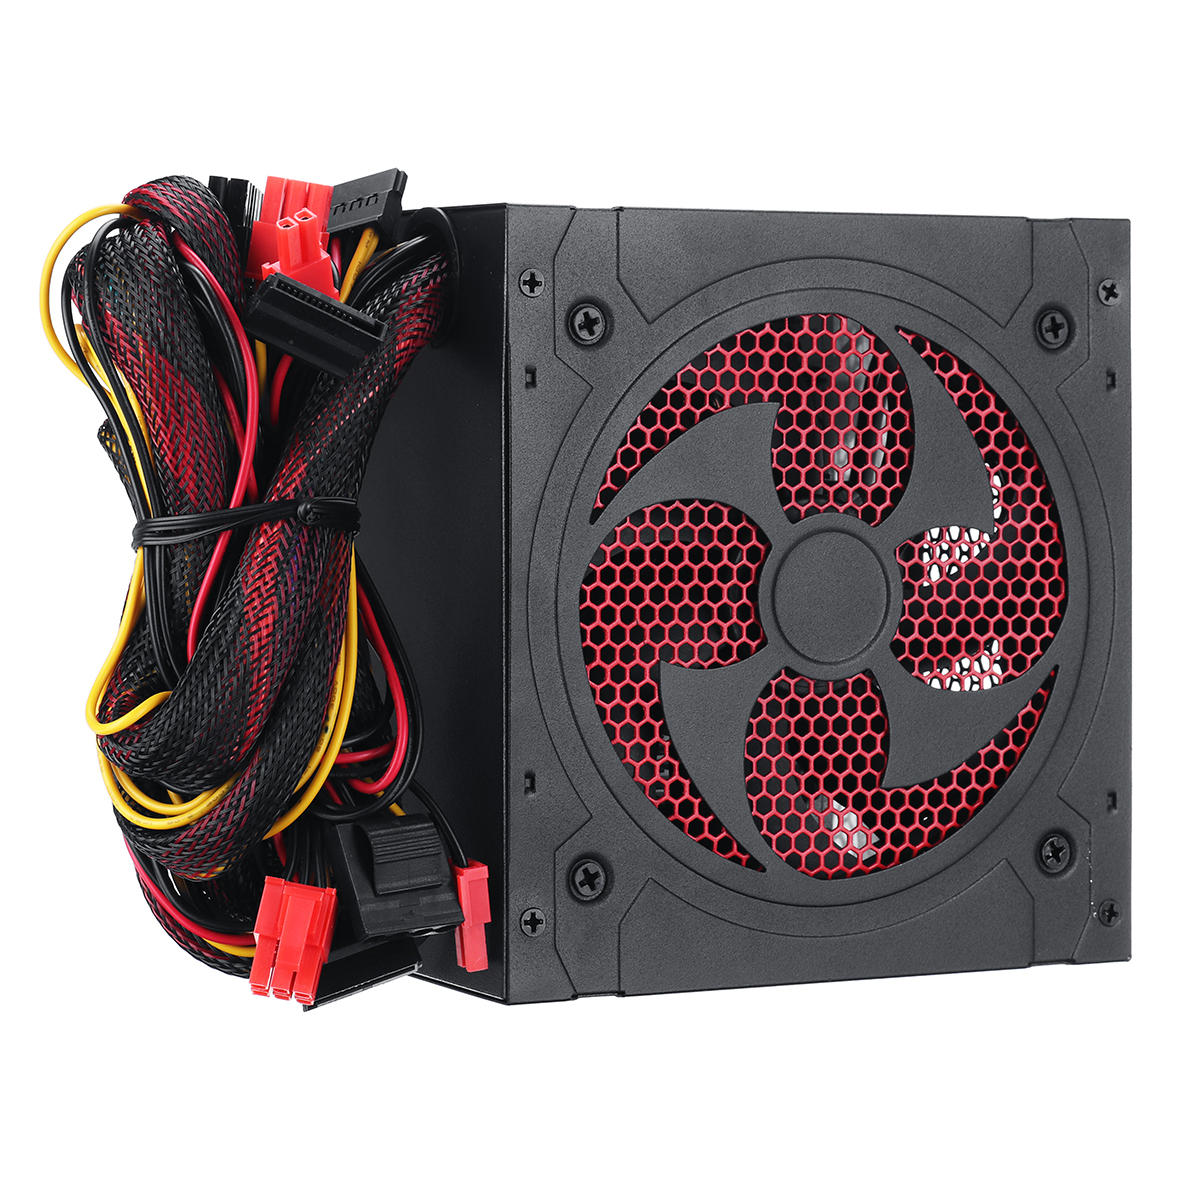 Image of 1000W Silent PC Power Supply Gaming PCI SATA ATX 12V 231 LED Fan Computer